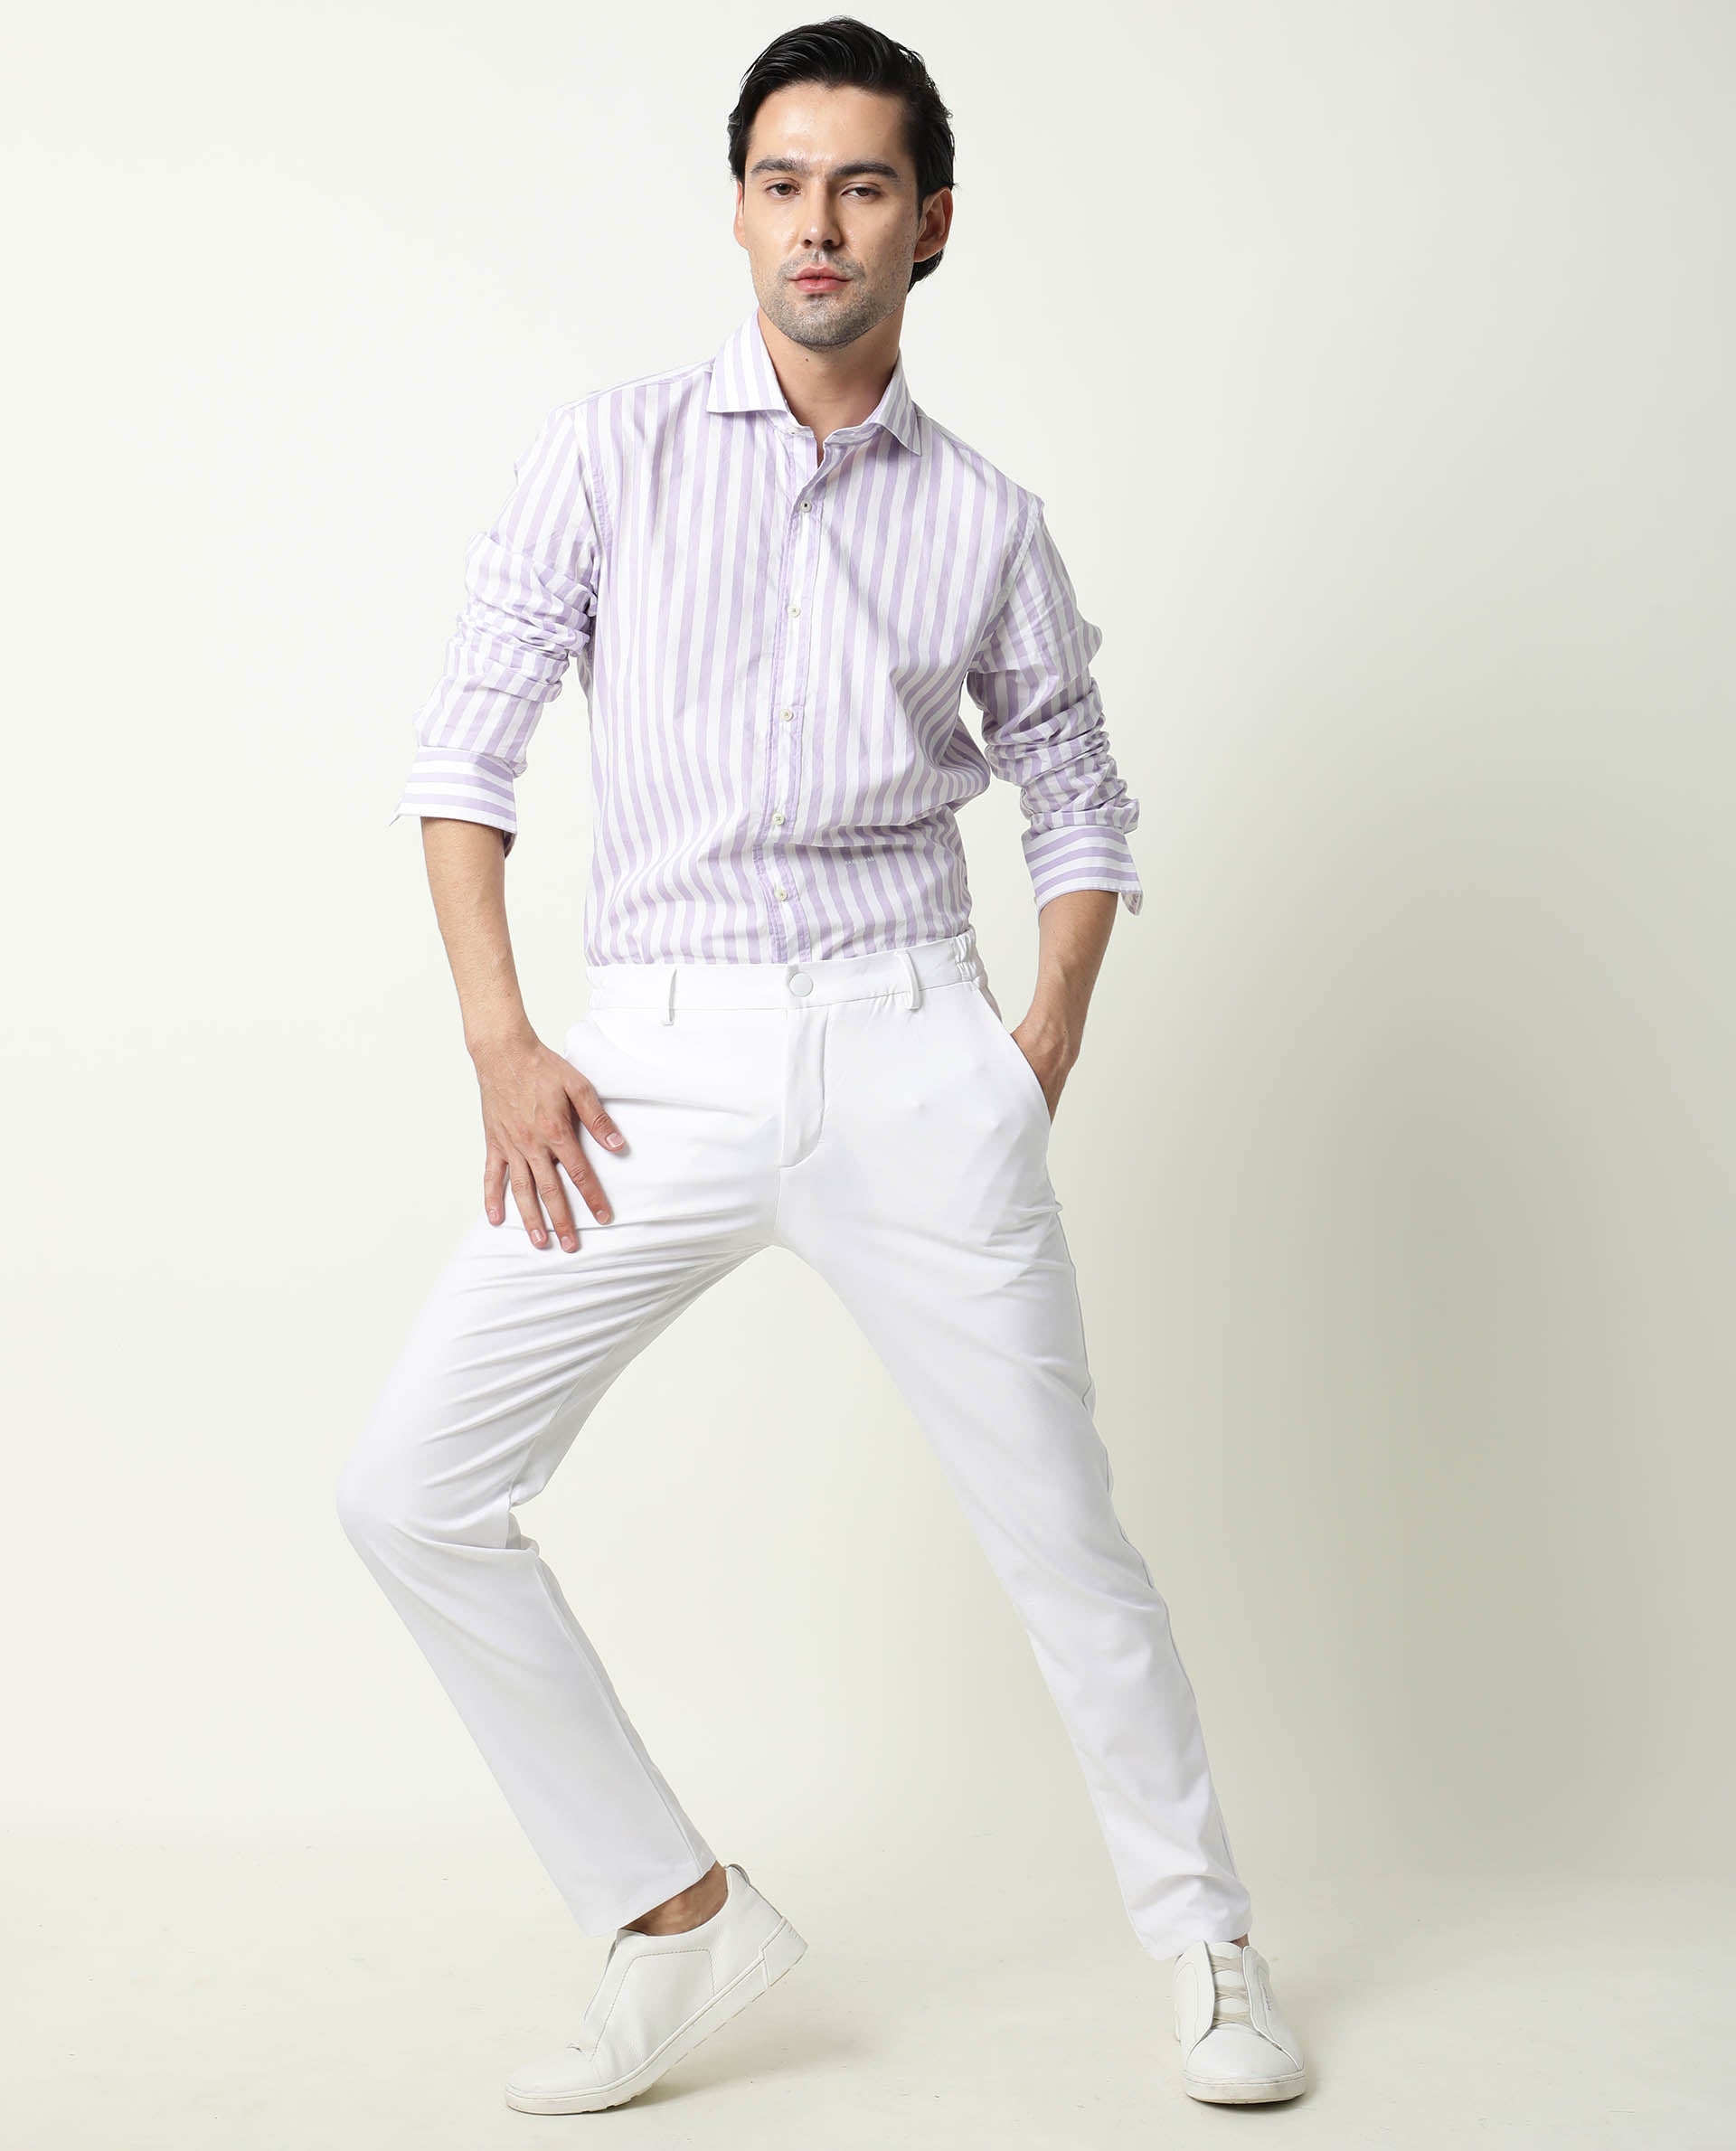 What colour shirt go well with a white pant  Quora